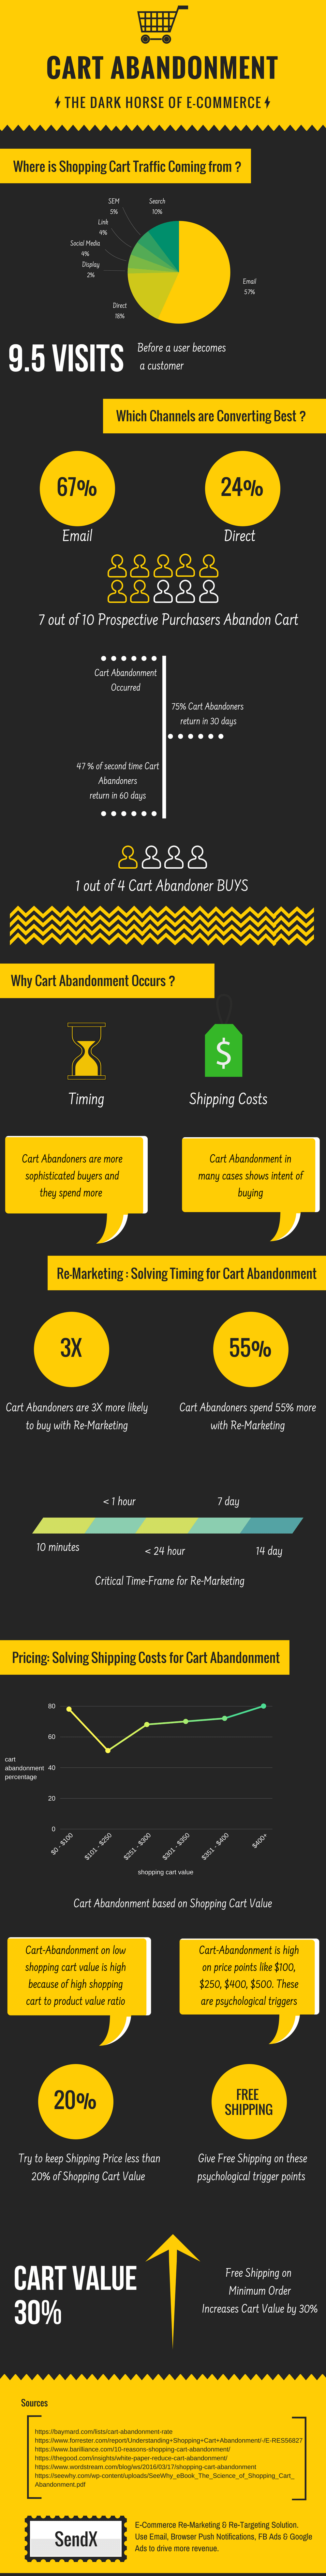 Cart abandonment infographic